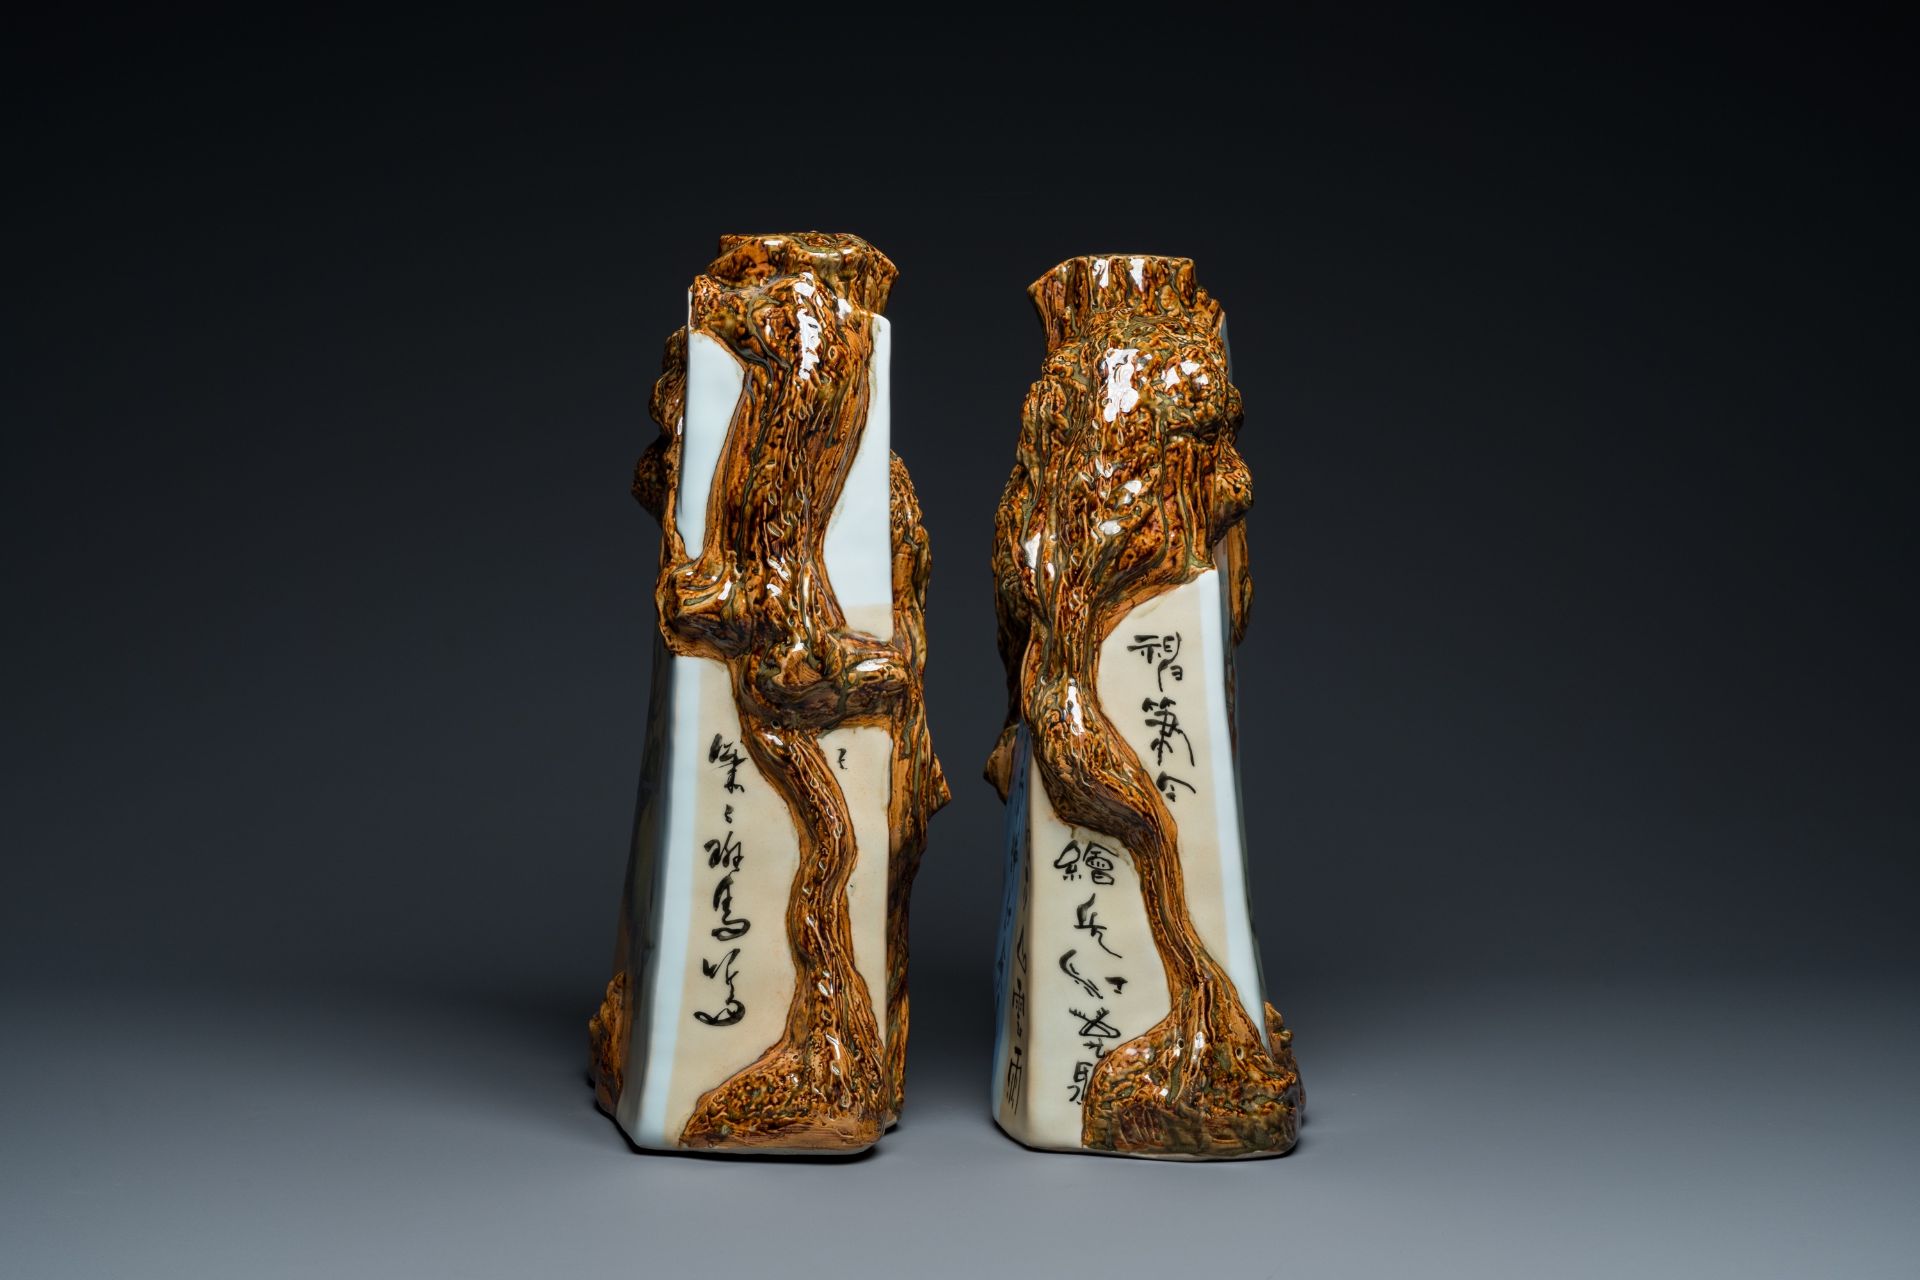 Two Chinese decorative faux bois ornaments, '1200 Years Jingdezheng', dated 2004 - Bild 3 aus 7